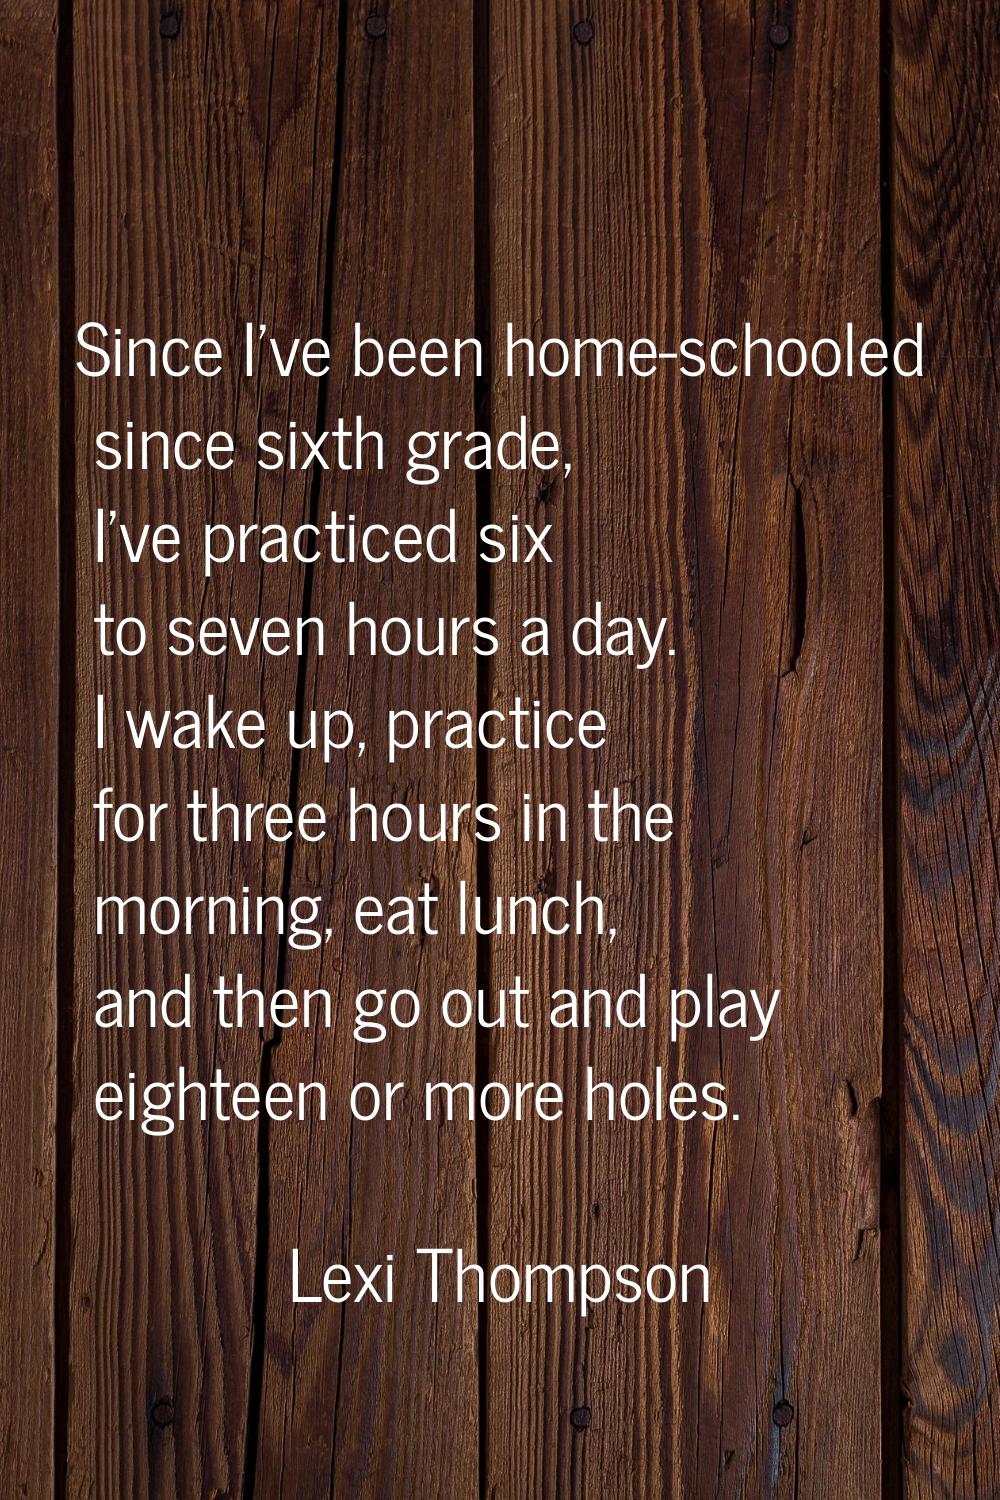 Since I've been home-schooled since sixth grade, I've practiced six to seven hours a day. I wake up